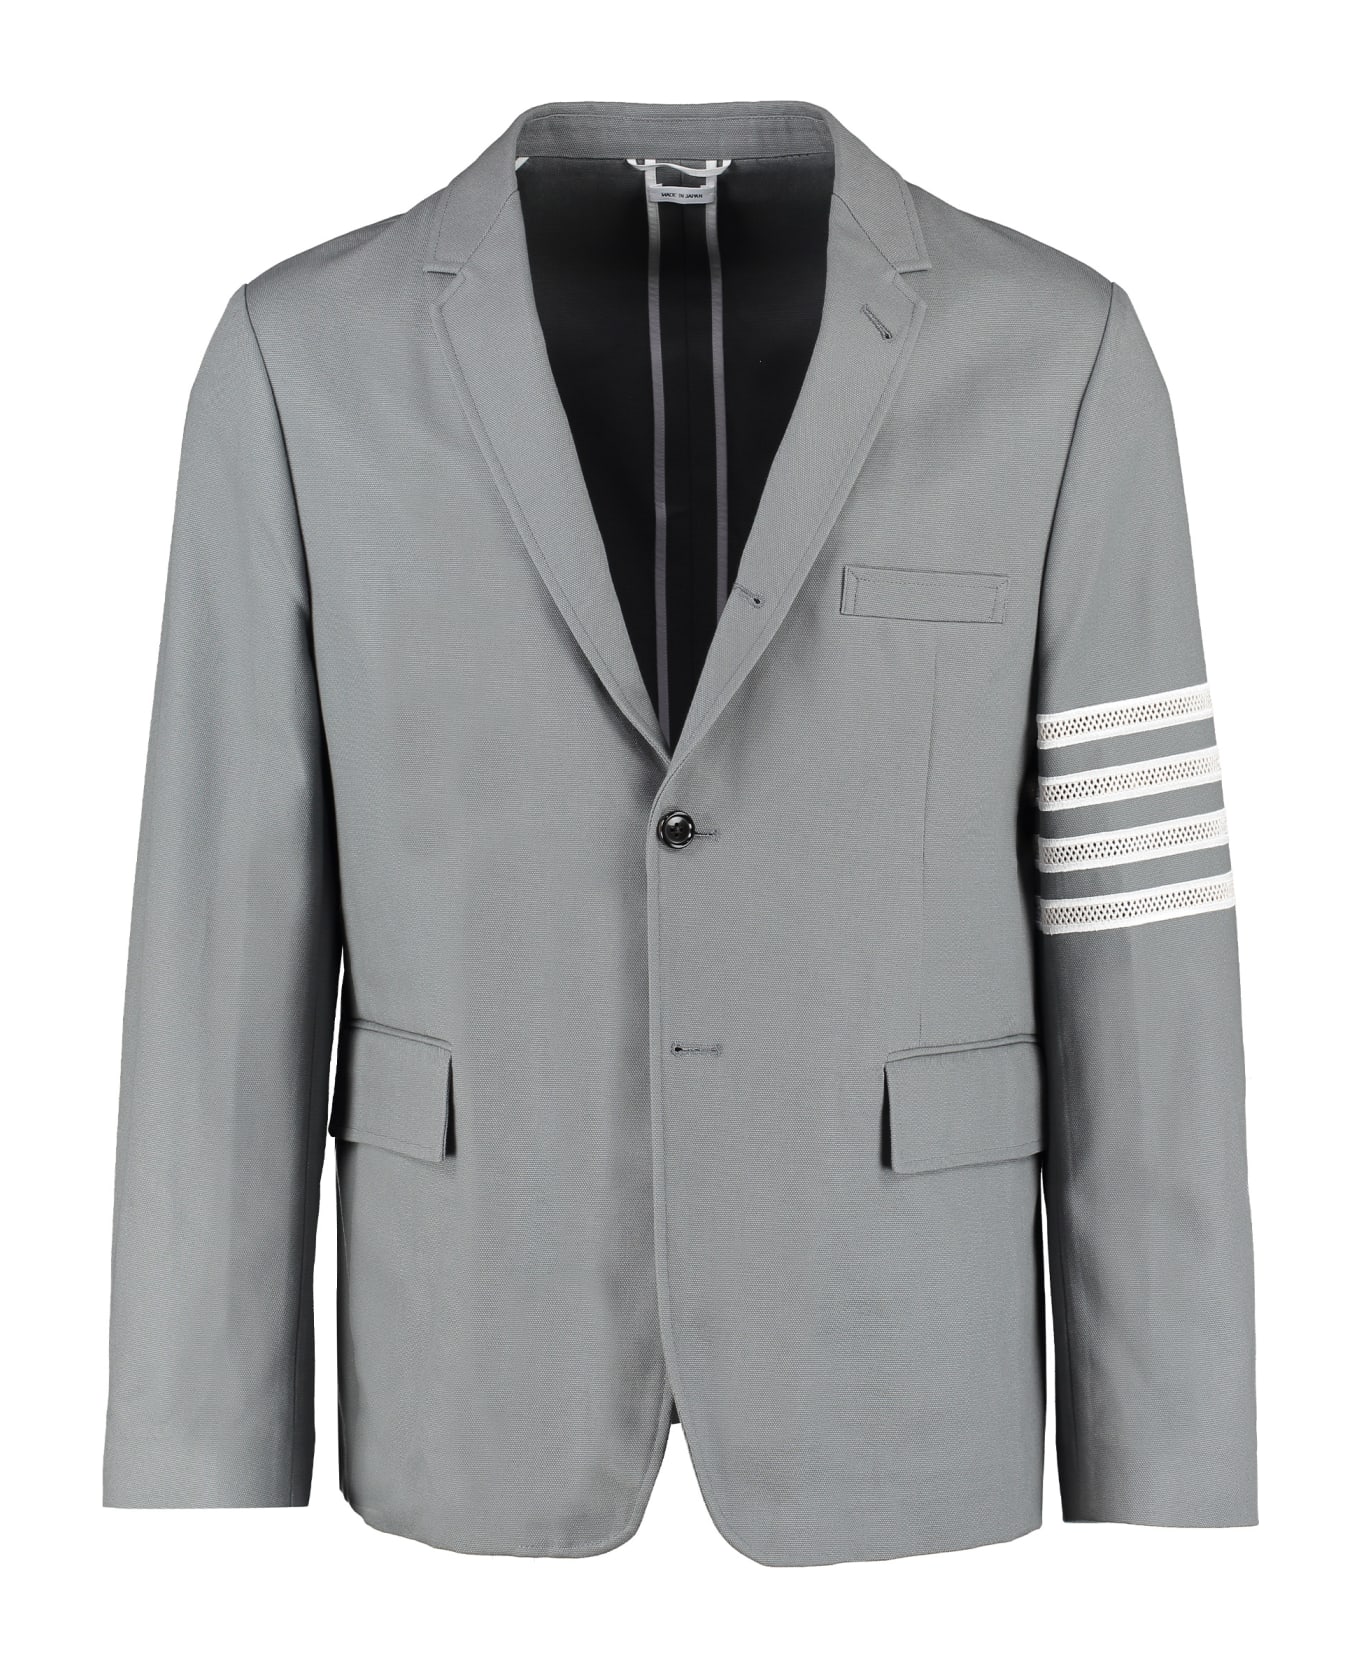 Thom Browne Single-breasted Two Button Jacket - grey